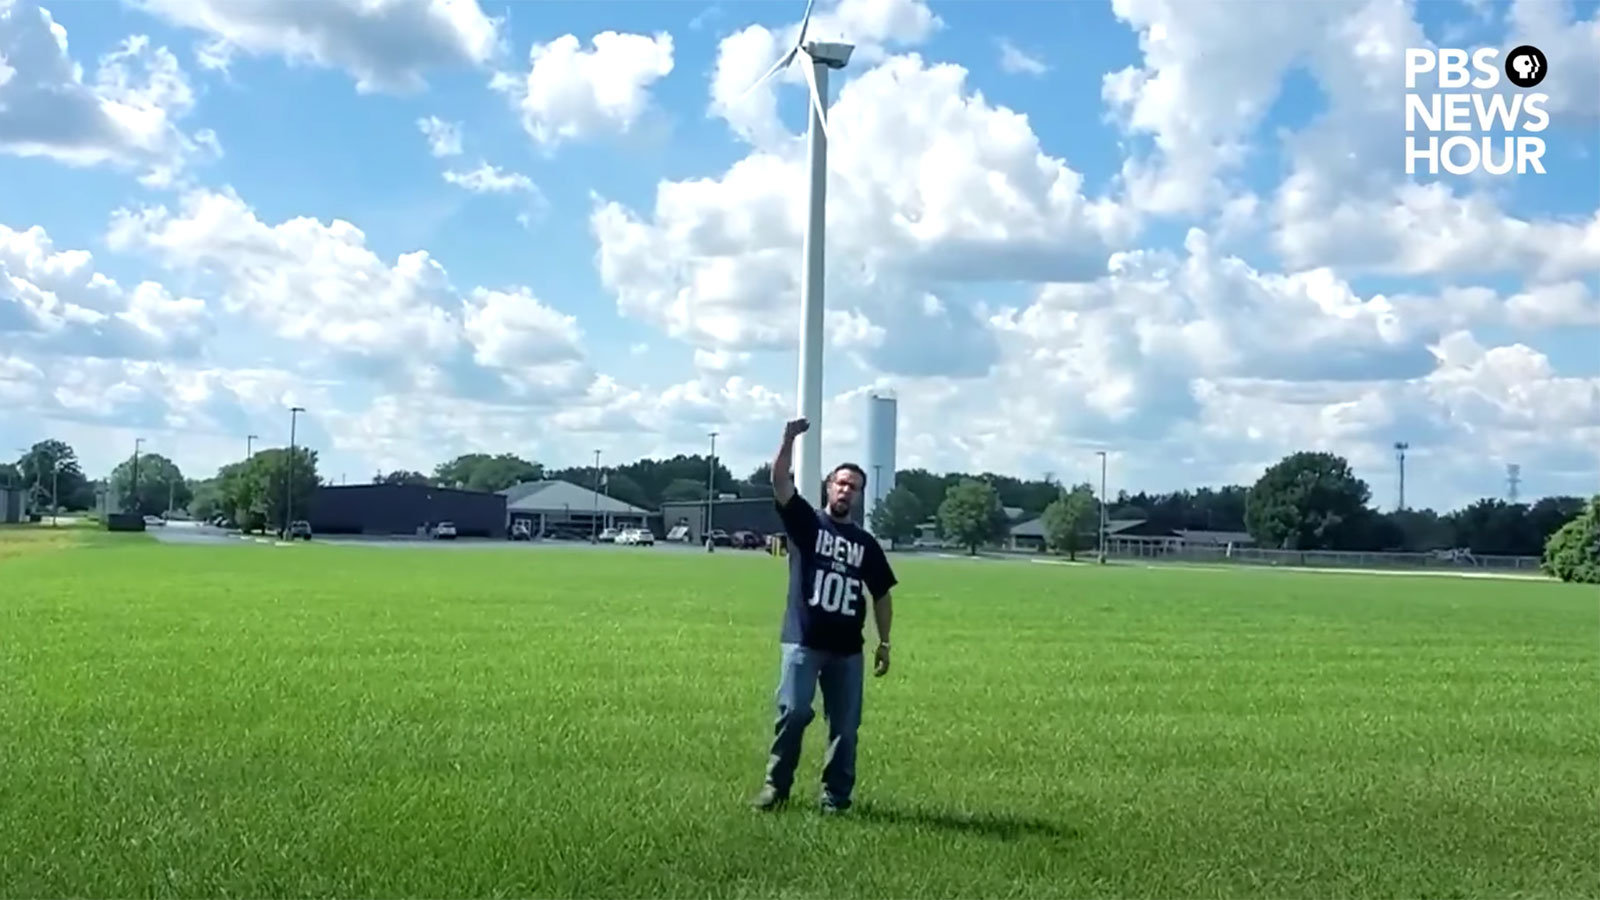 A man turns away from a large wind turbine and raises his fist in support of Joe Biden